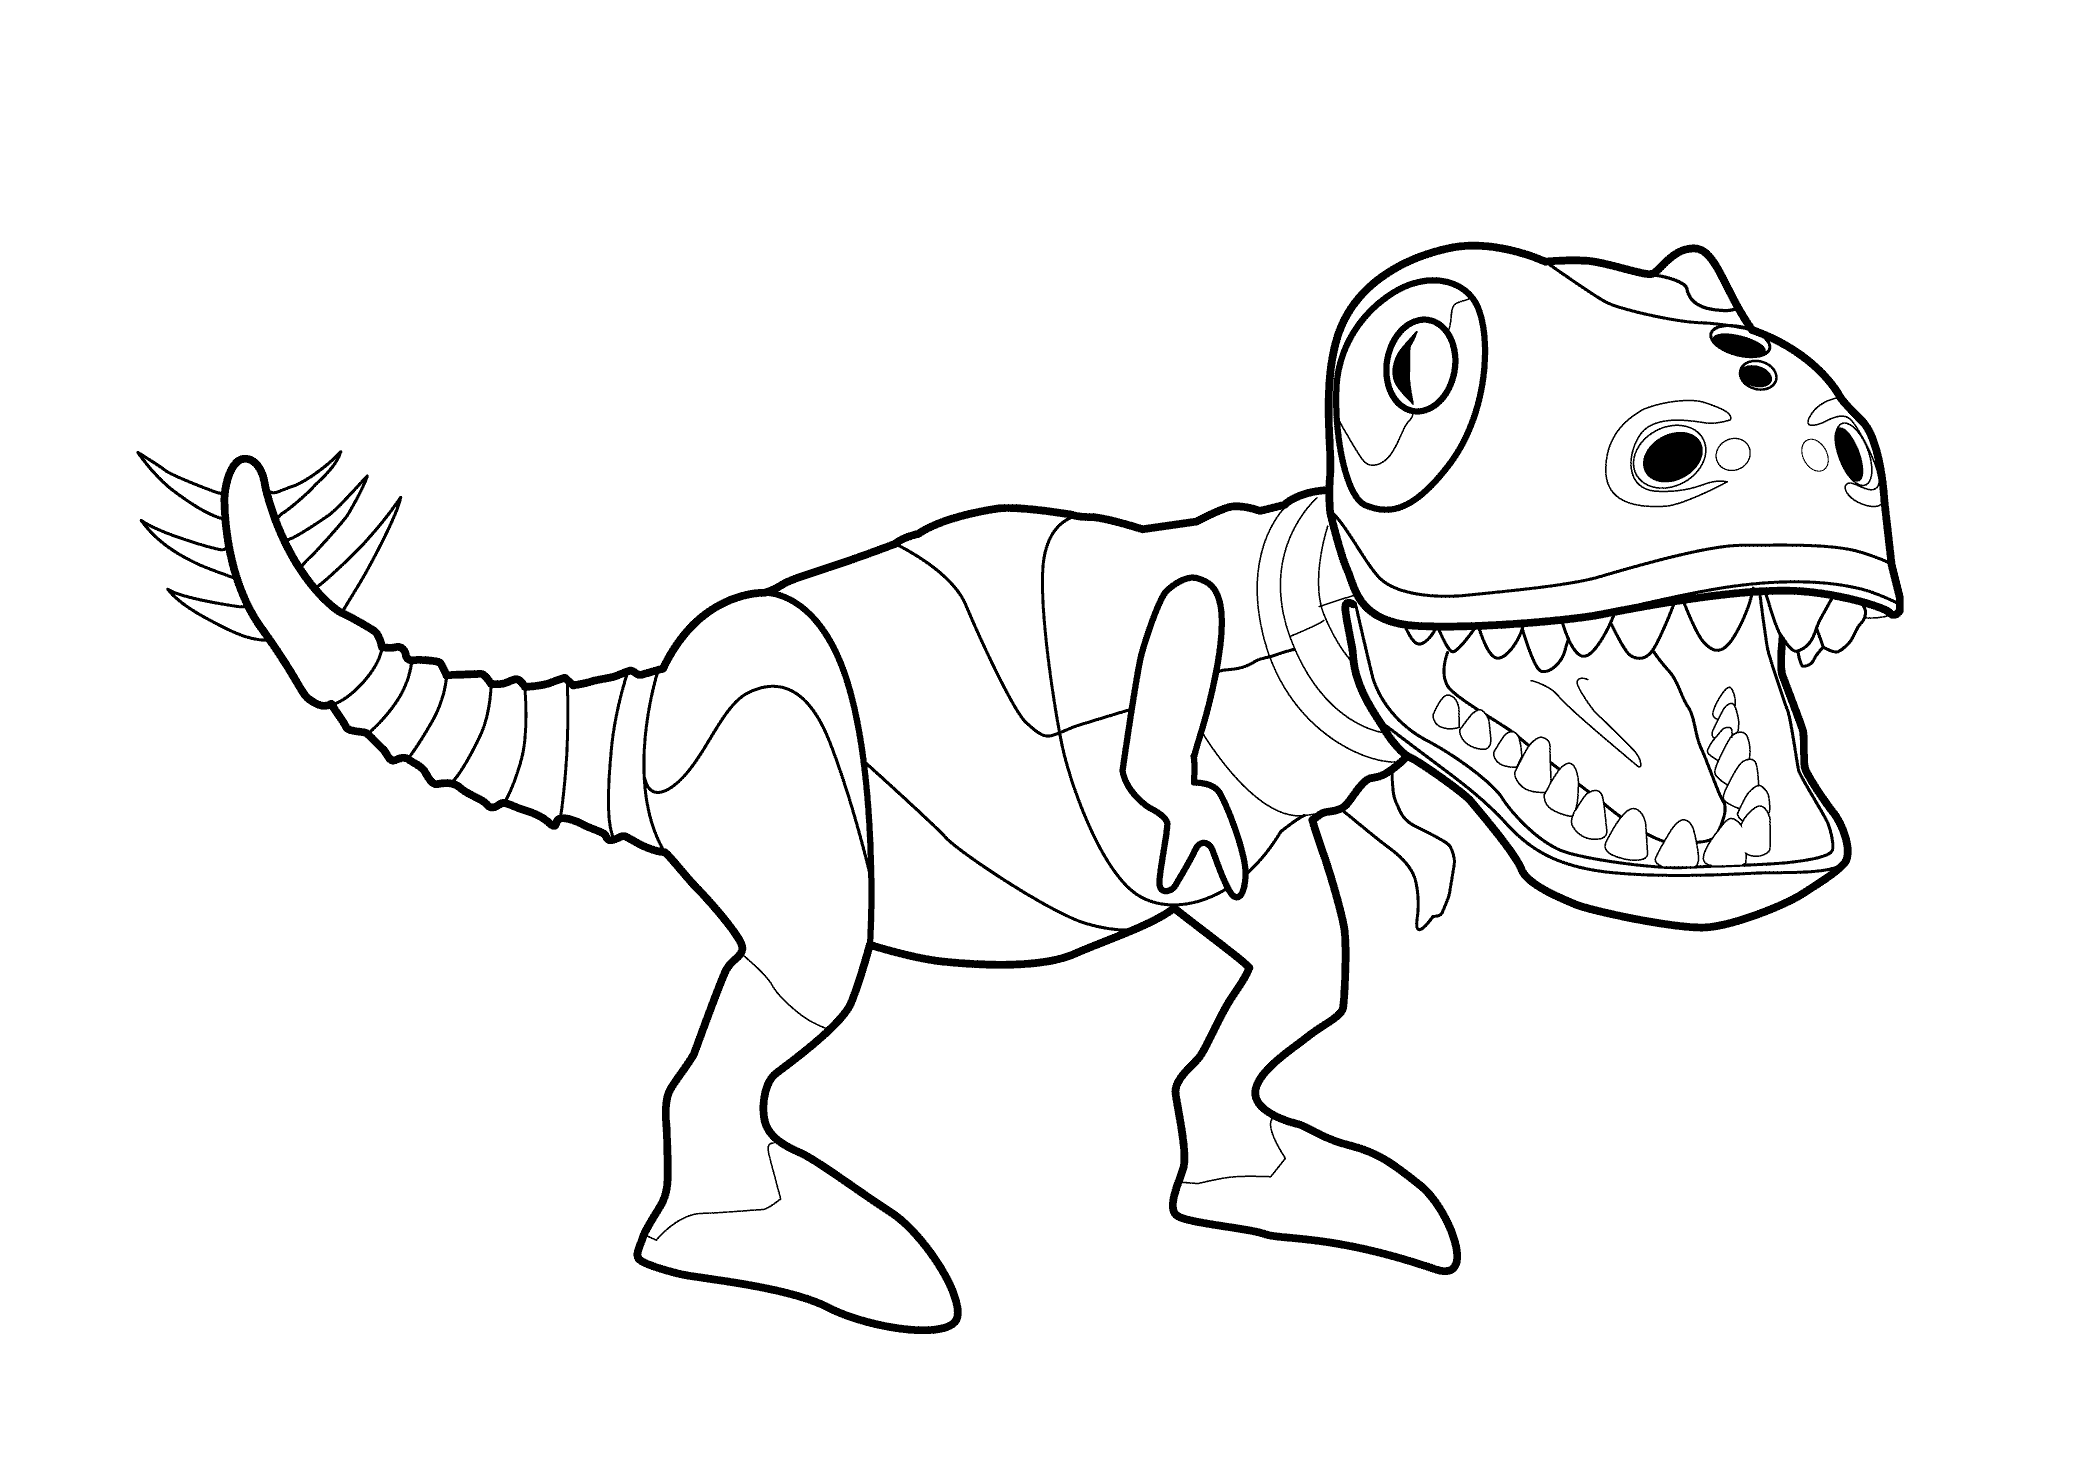 Dinosaur King Coloring Pages - From two to six or seven. | ConnectorPhotos